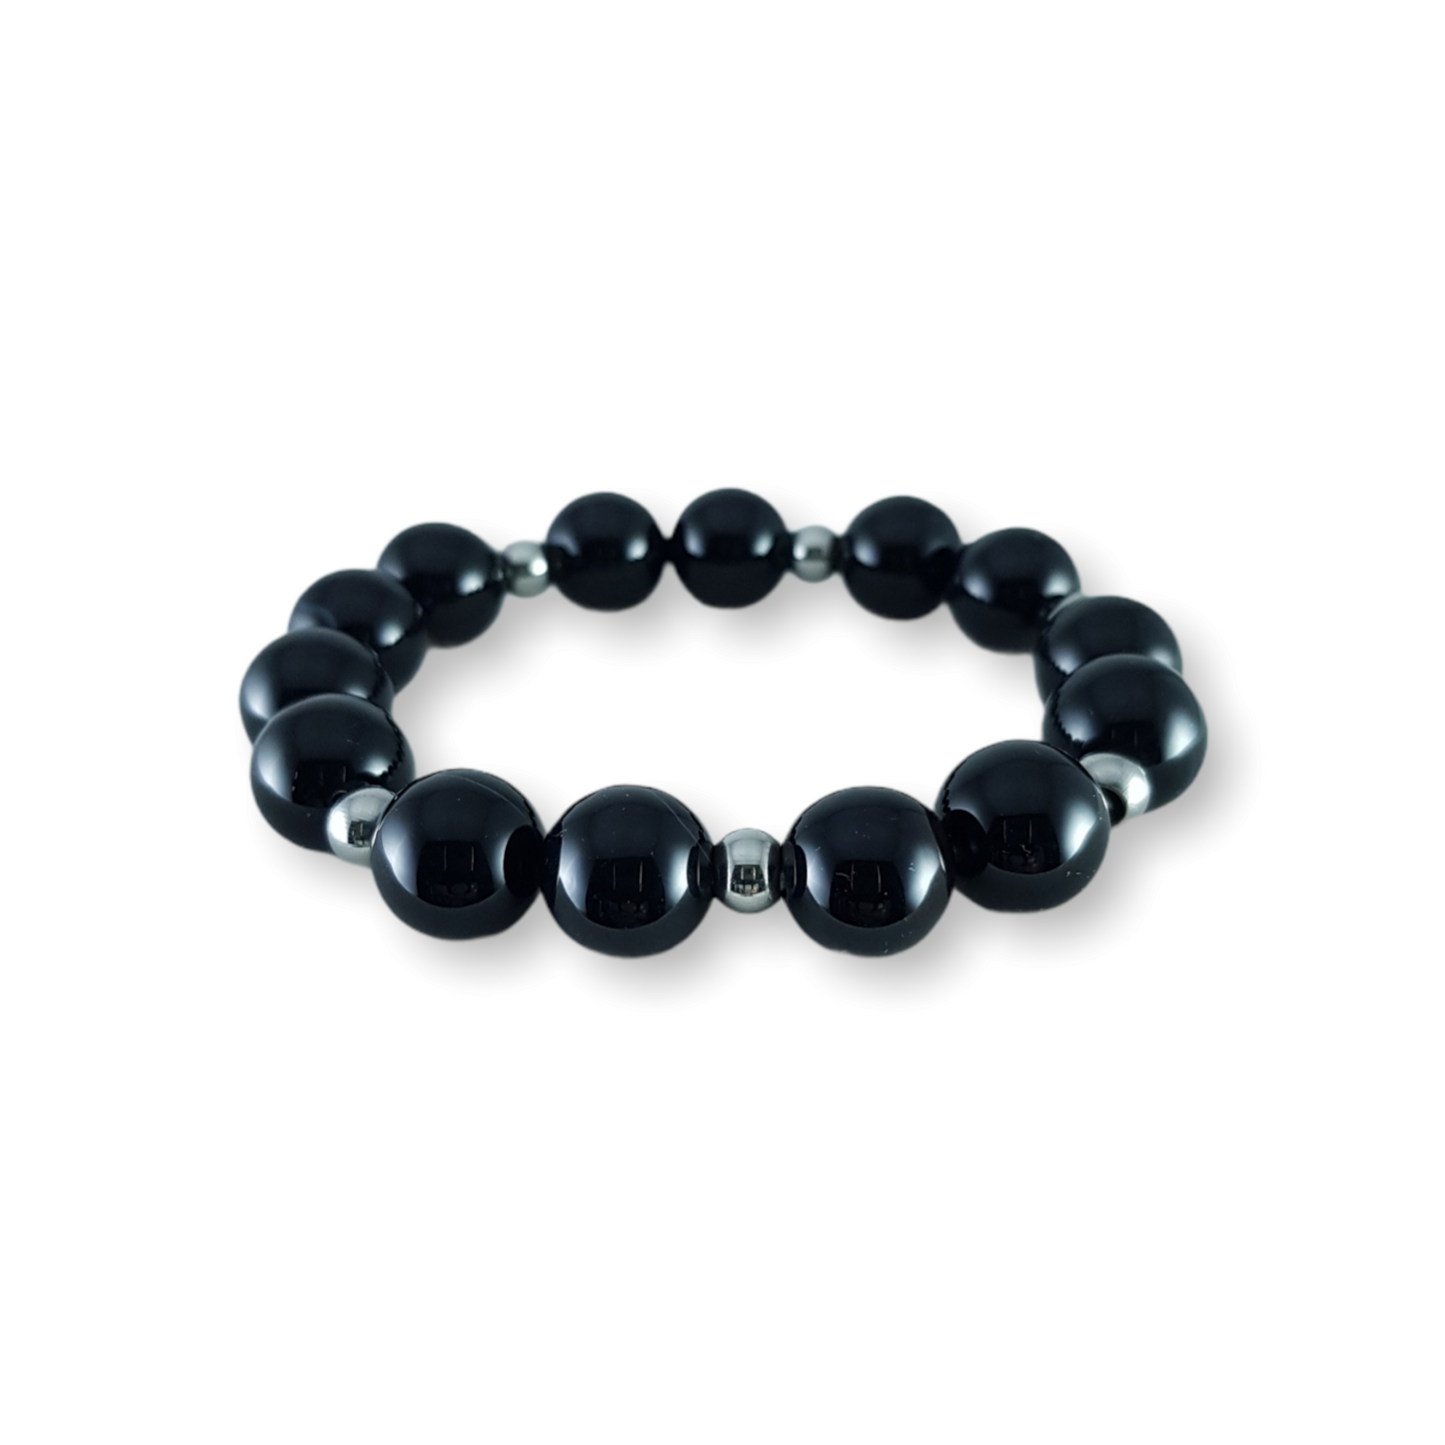 Black Onyx Bracelet Mid-sized Bead with Stainless Steel Spacer